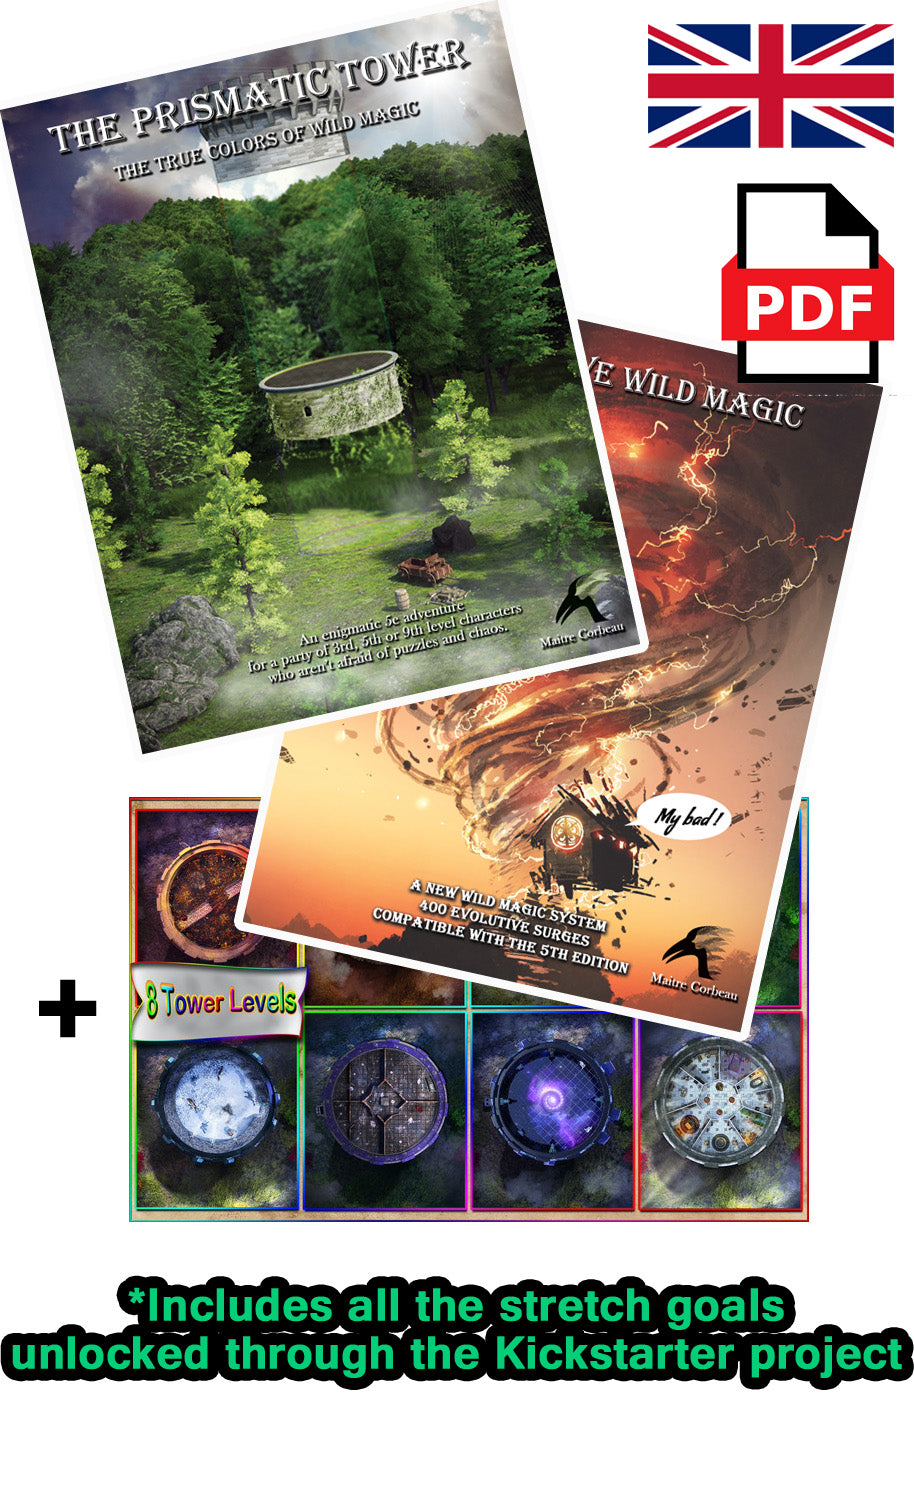 Includes everything from the kickstarter project normal pledge.